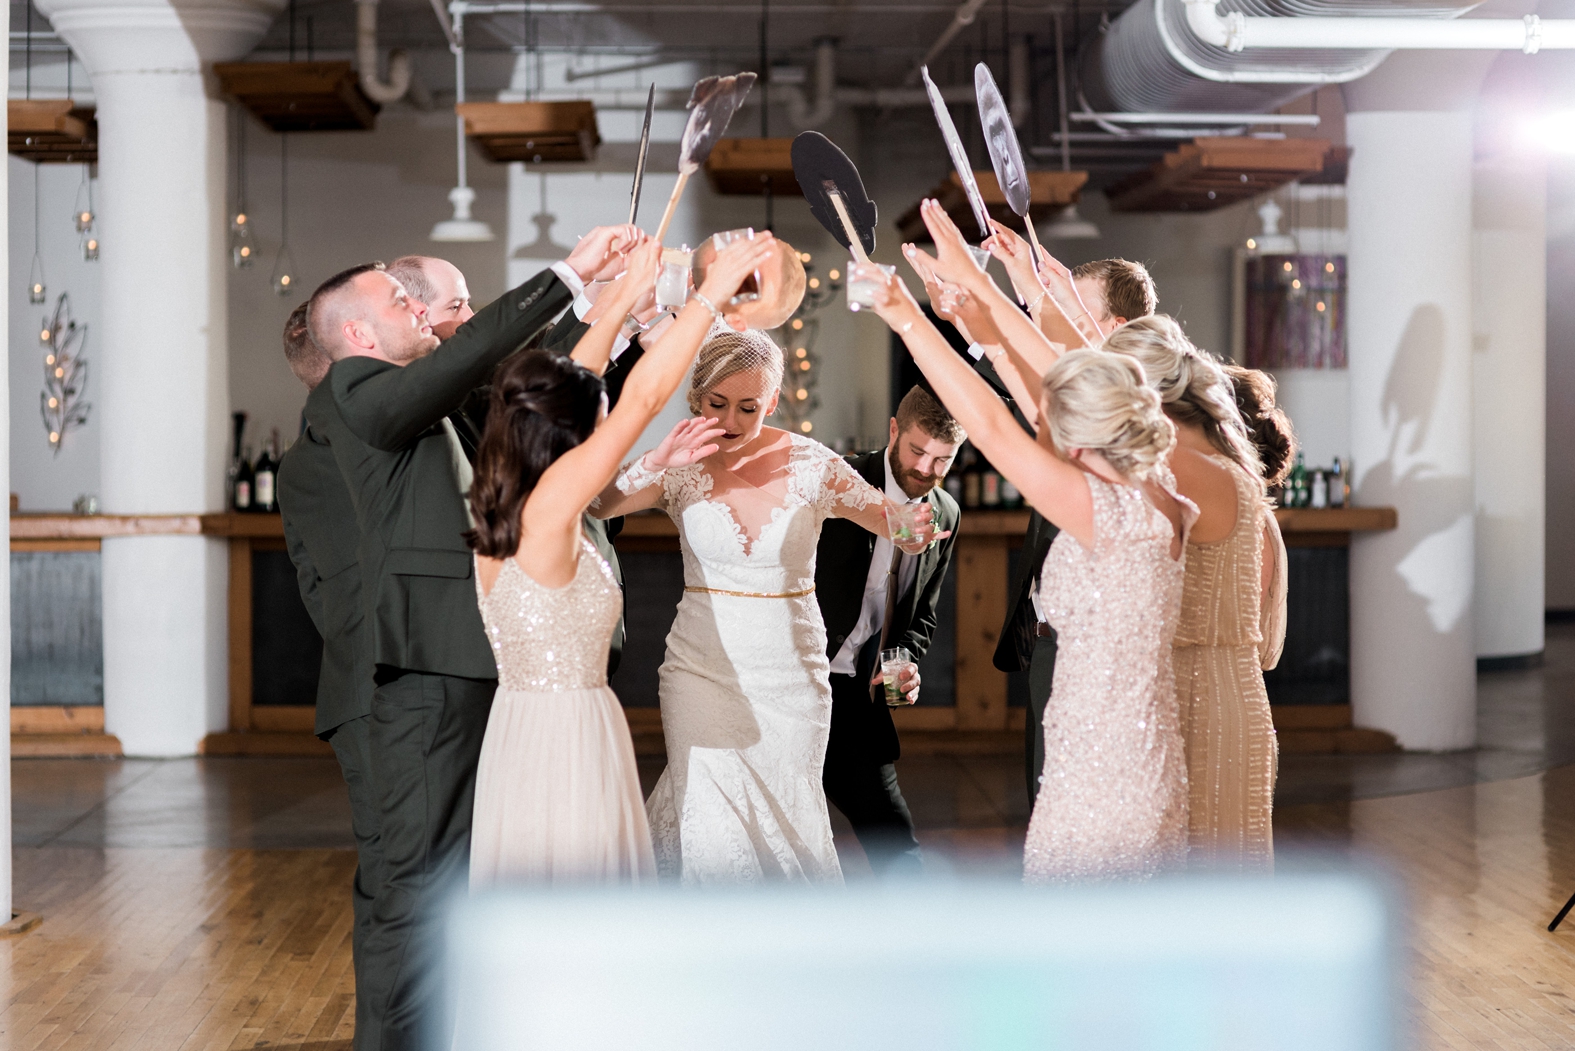 Bride and groom enter on 6th floor of Windows on Washington. Bride in lace long sleeve dress with gold belt and birdcage veil. Groom in olive green suit with silver tie. Bridesmaids in blush and champagne beaded dresses.